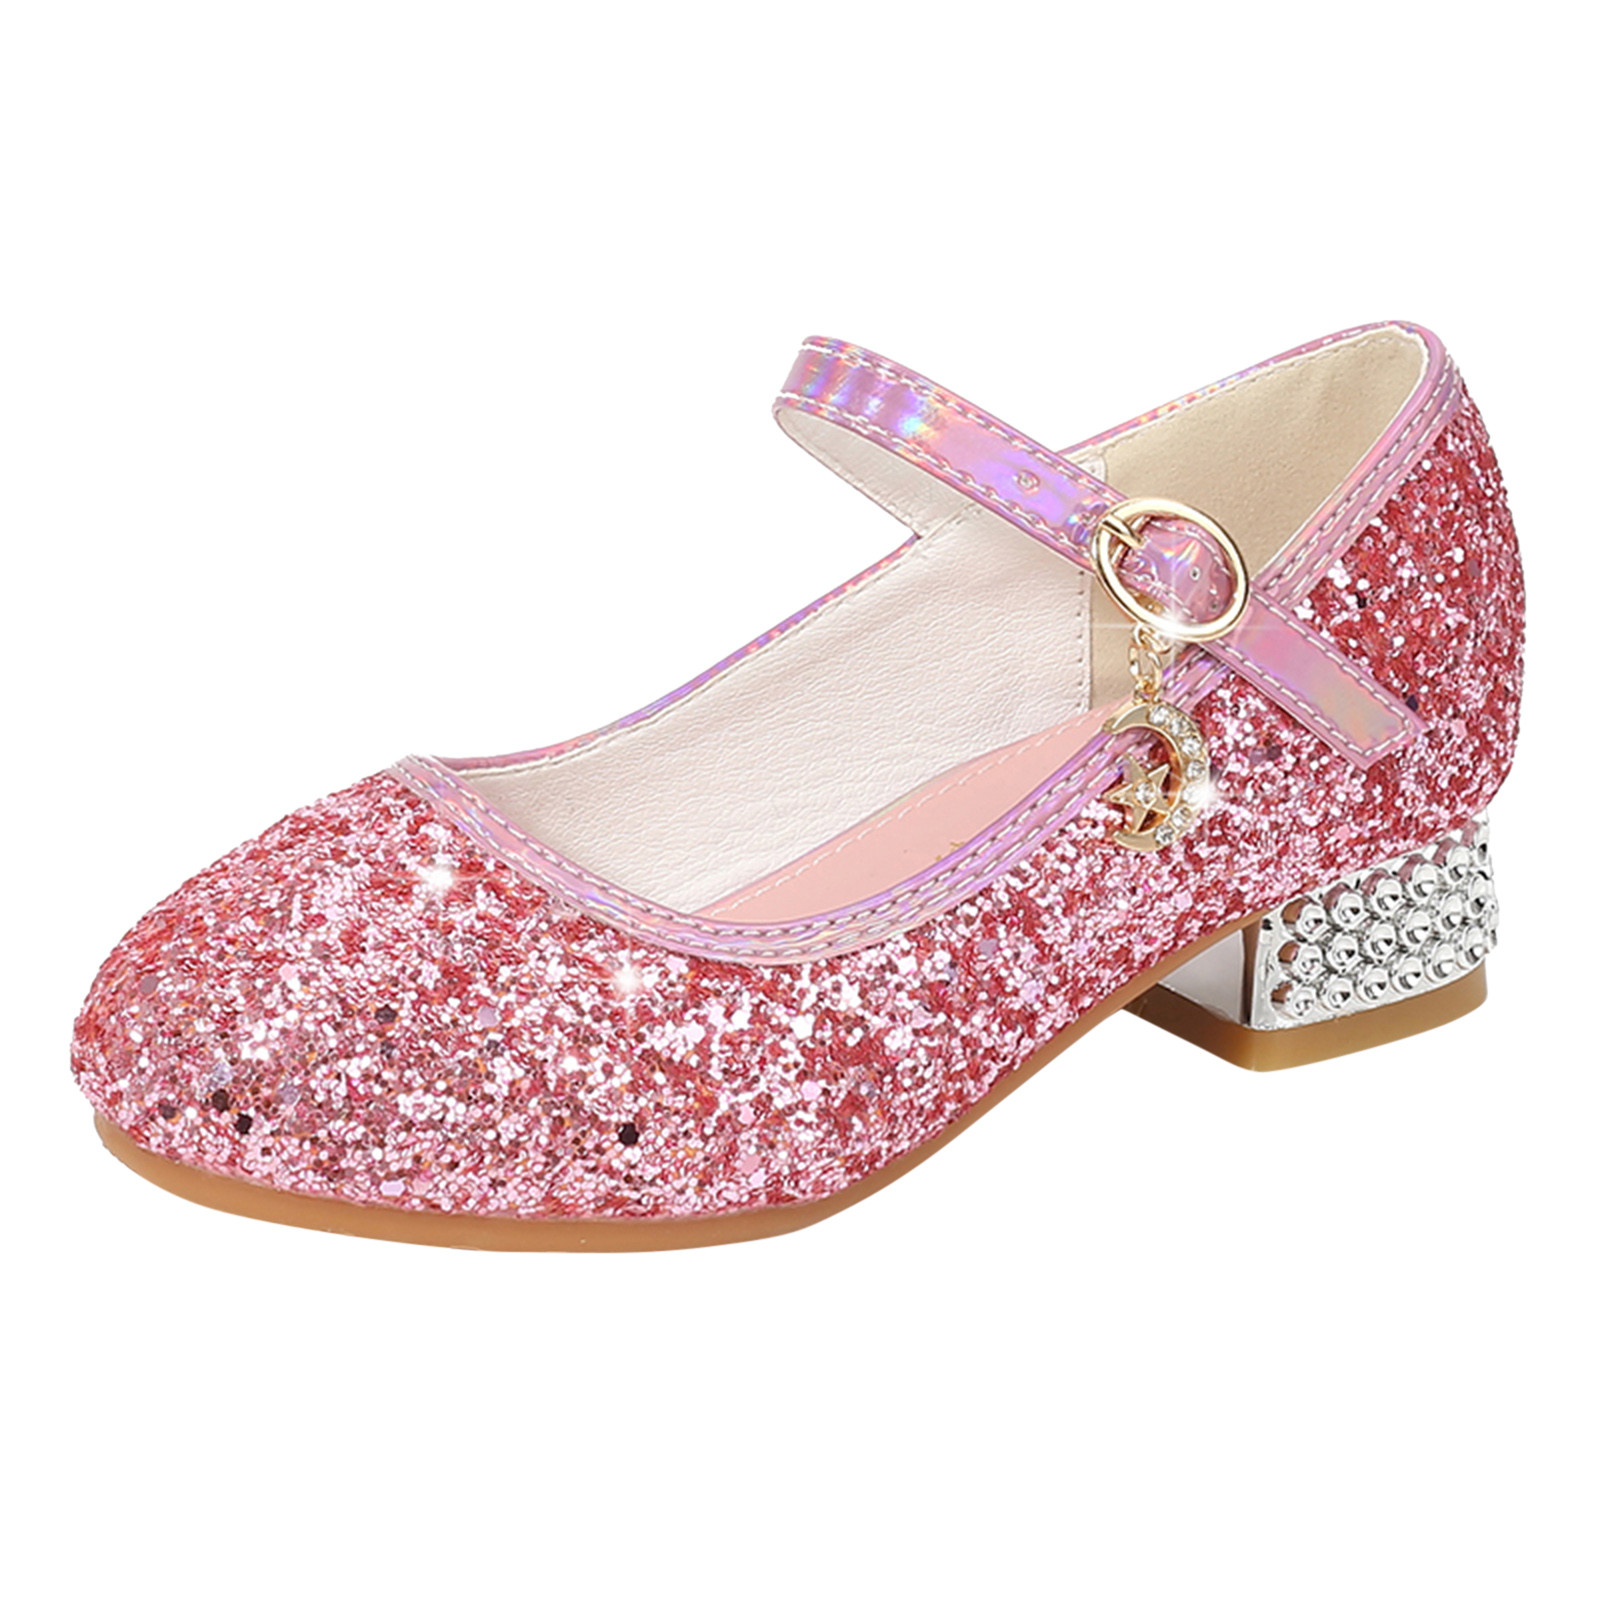 XINSHIDE Shoes Toddler Little Kid Girls Pumps Glitter Sequins Princess Low Heels Party Dance Shoes Rhinestone Sandals Baby Casual Shoes - image 1 of 4